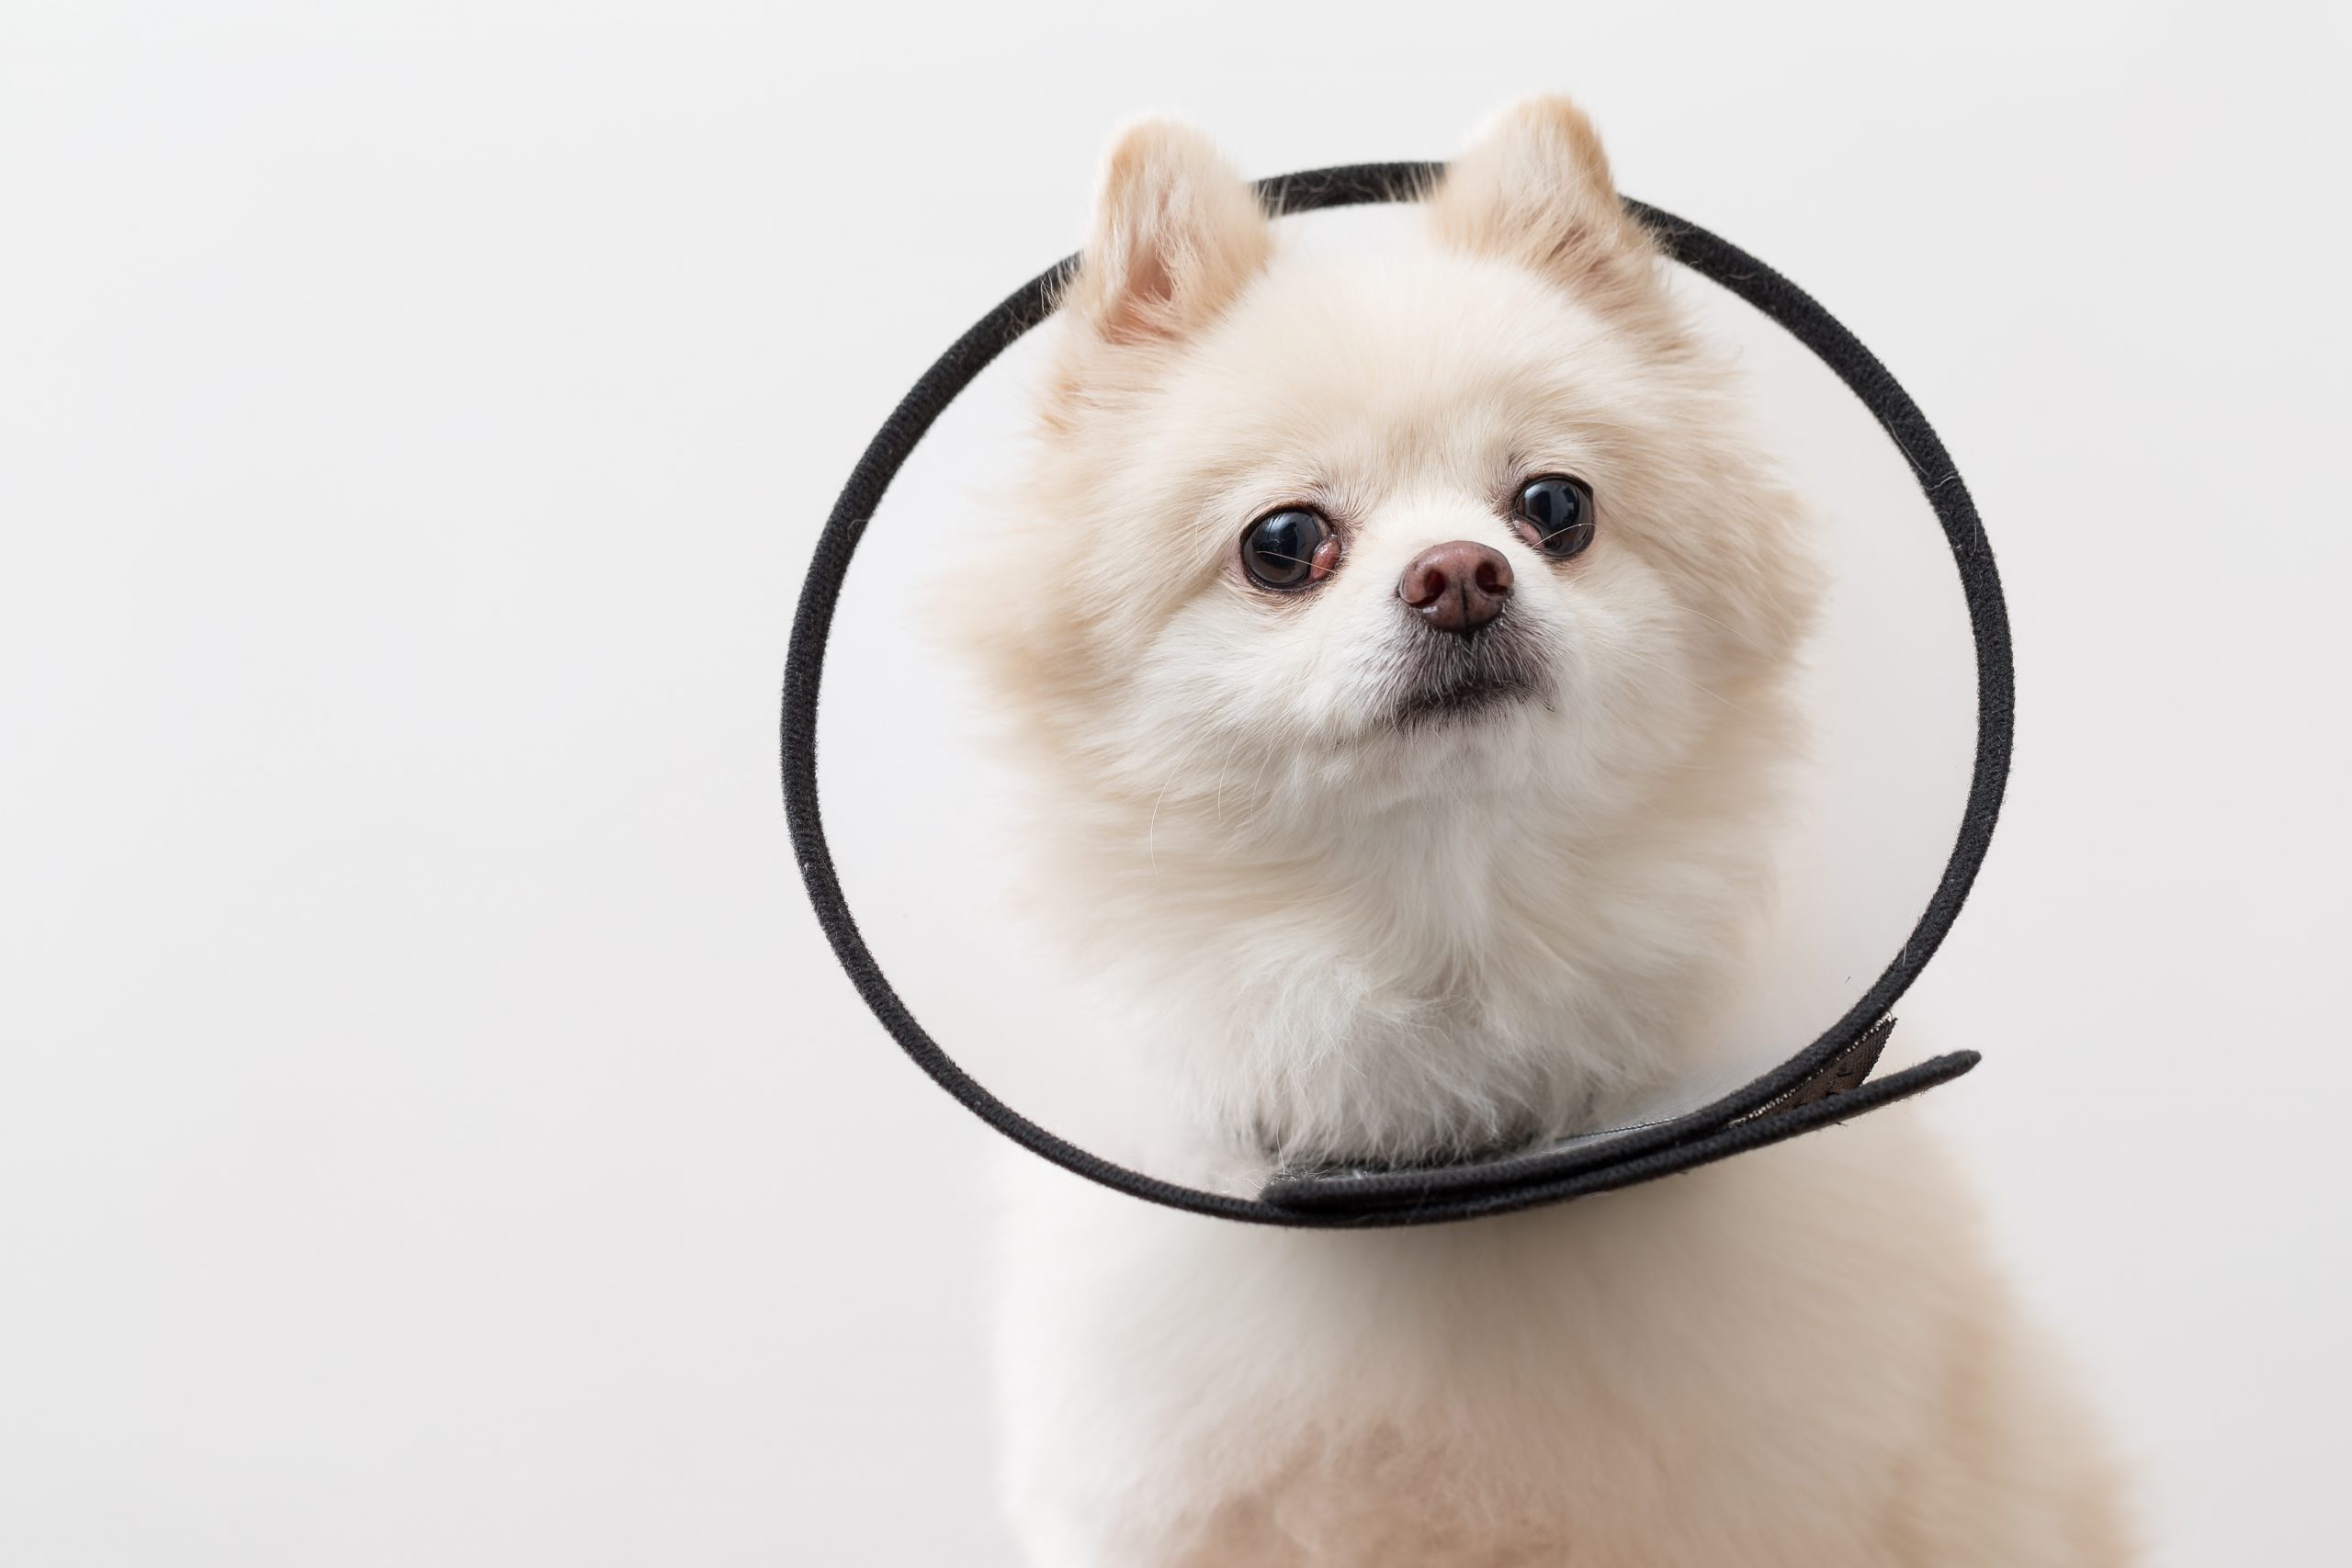 How long does a male dog have to wear the cone after neutering